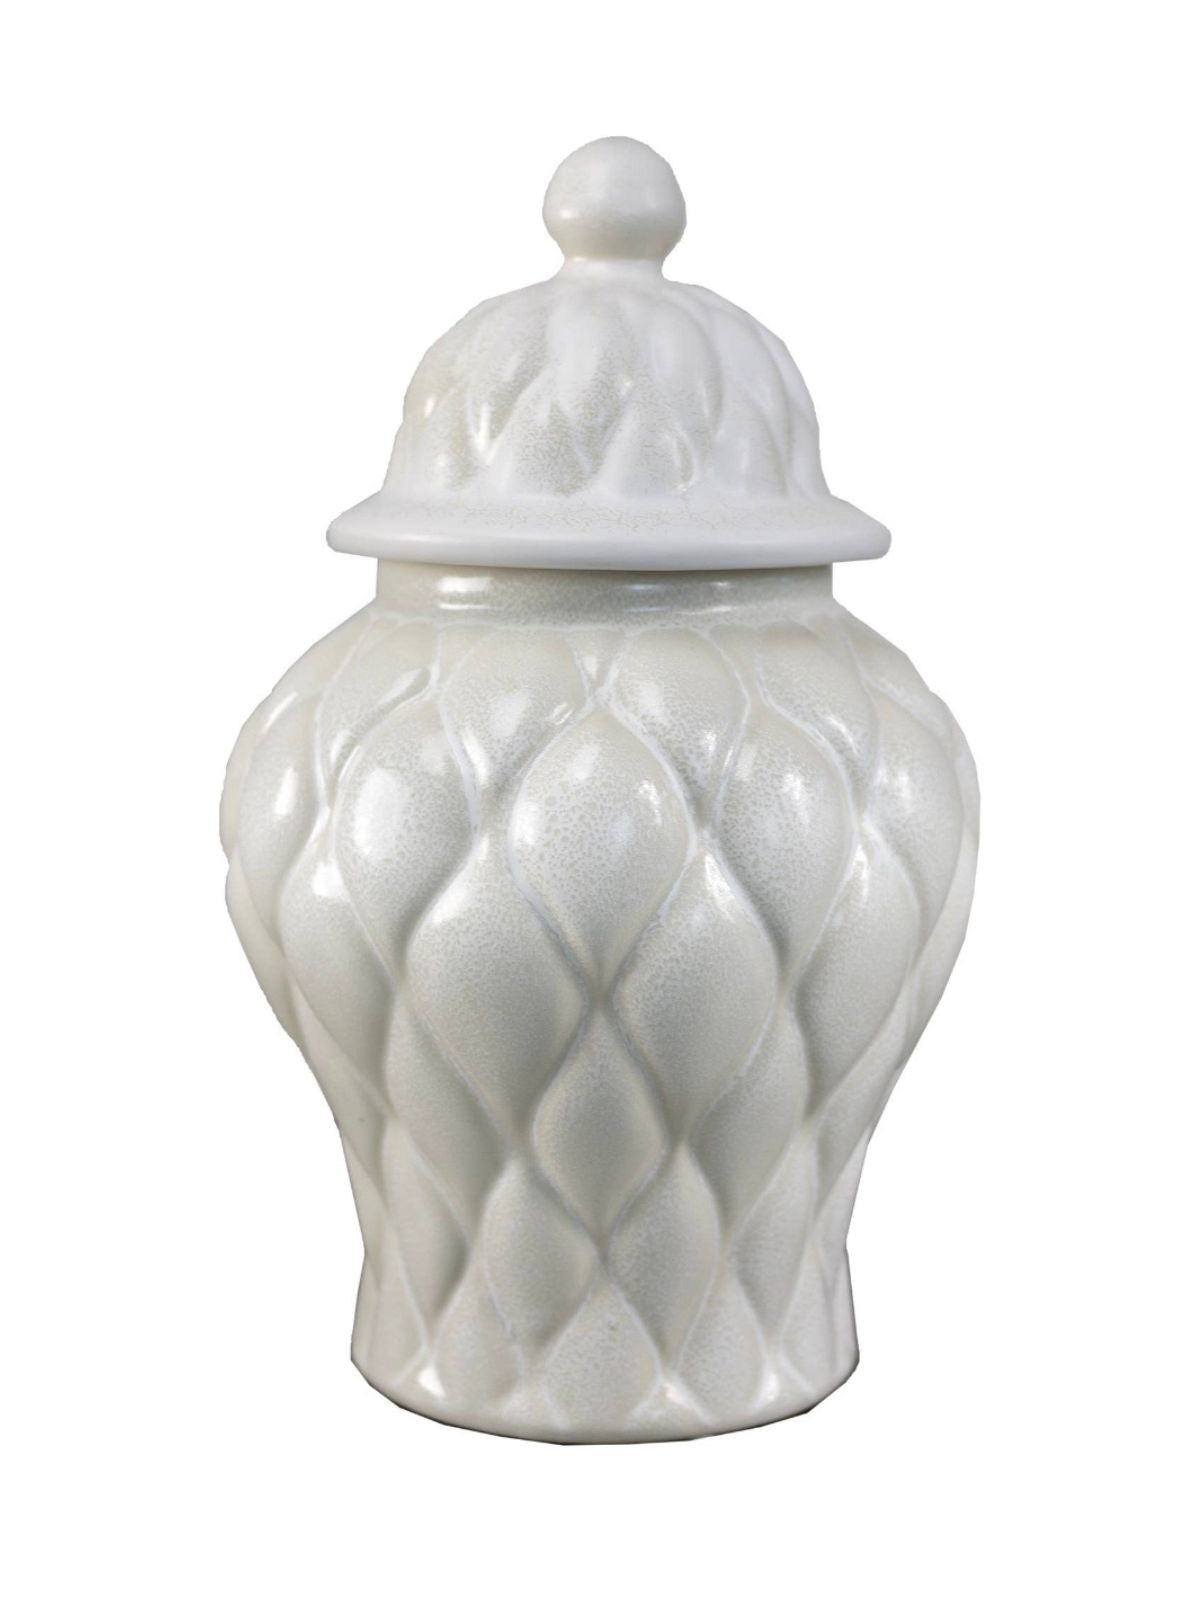 21H Ceramic lidded ginger jar with quilt-like texture and  soft white hue, Sold by KYA Home Decor.